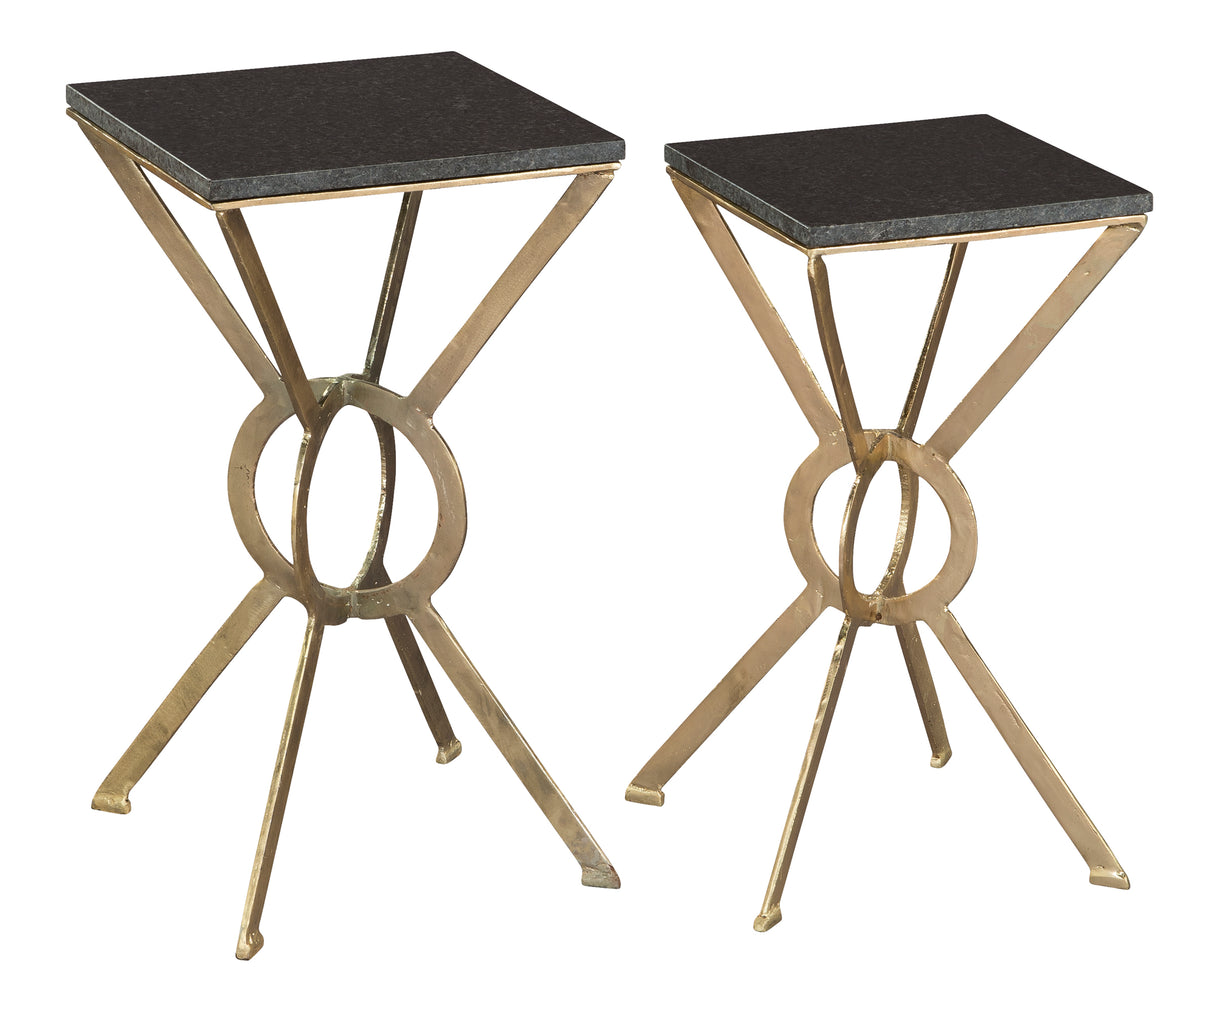 Hekman 27930 Accents 13in. x 13in. x 26in. Accent Tables